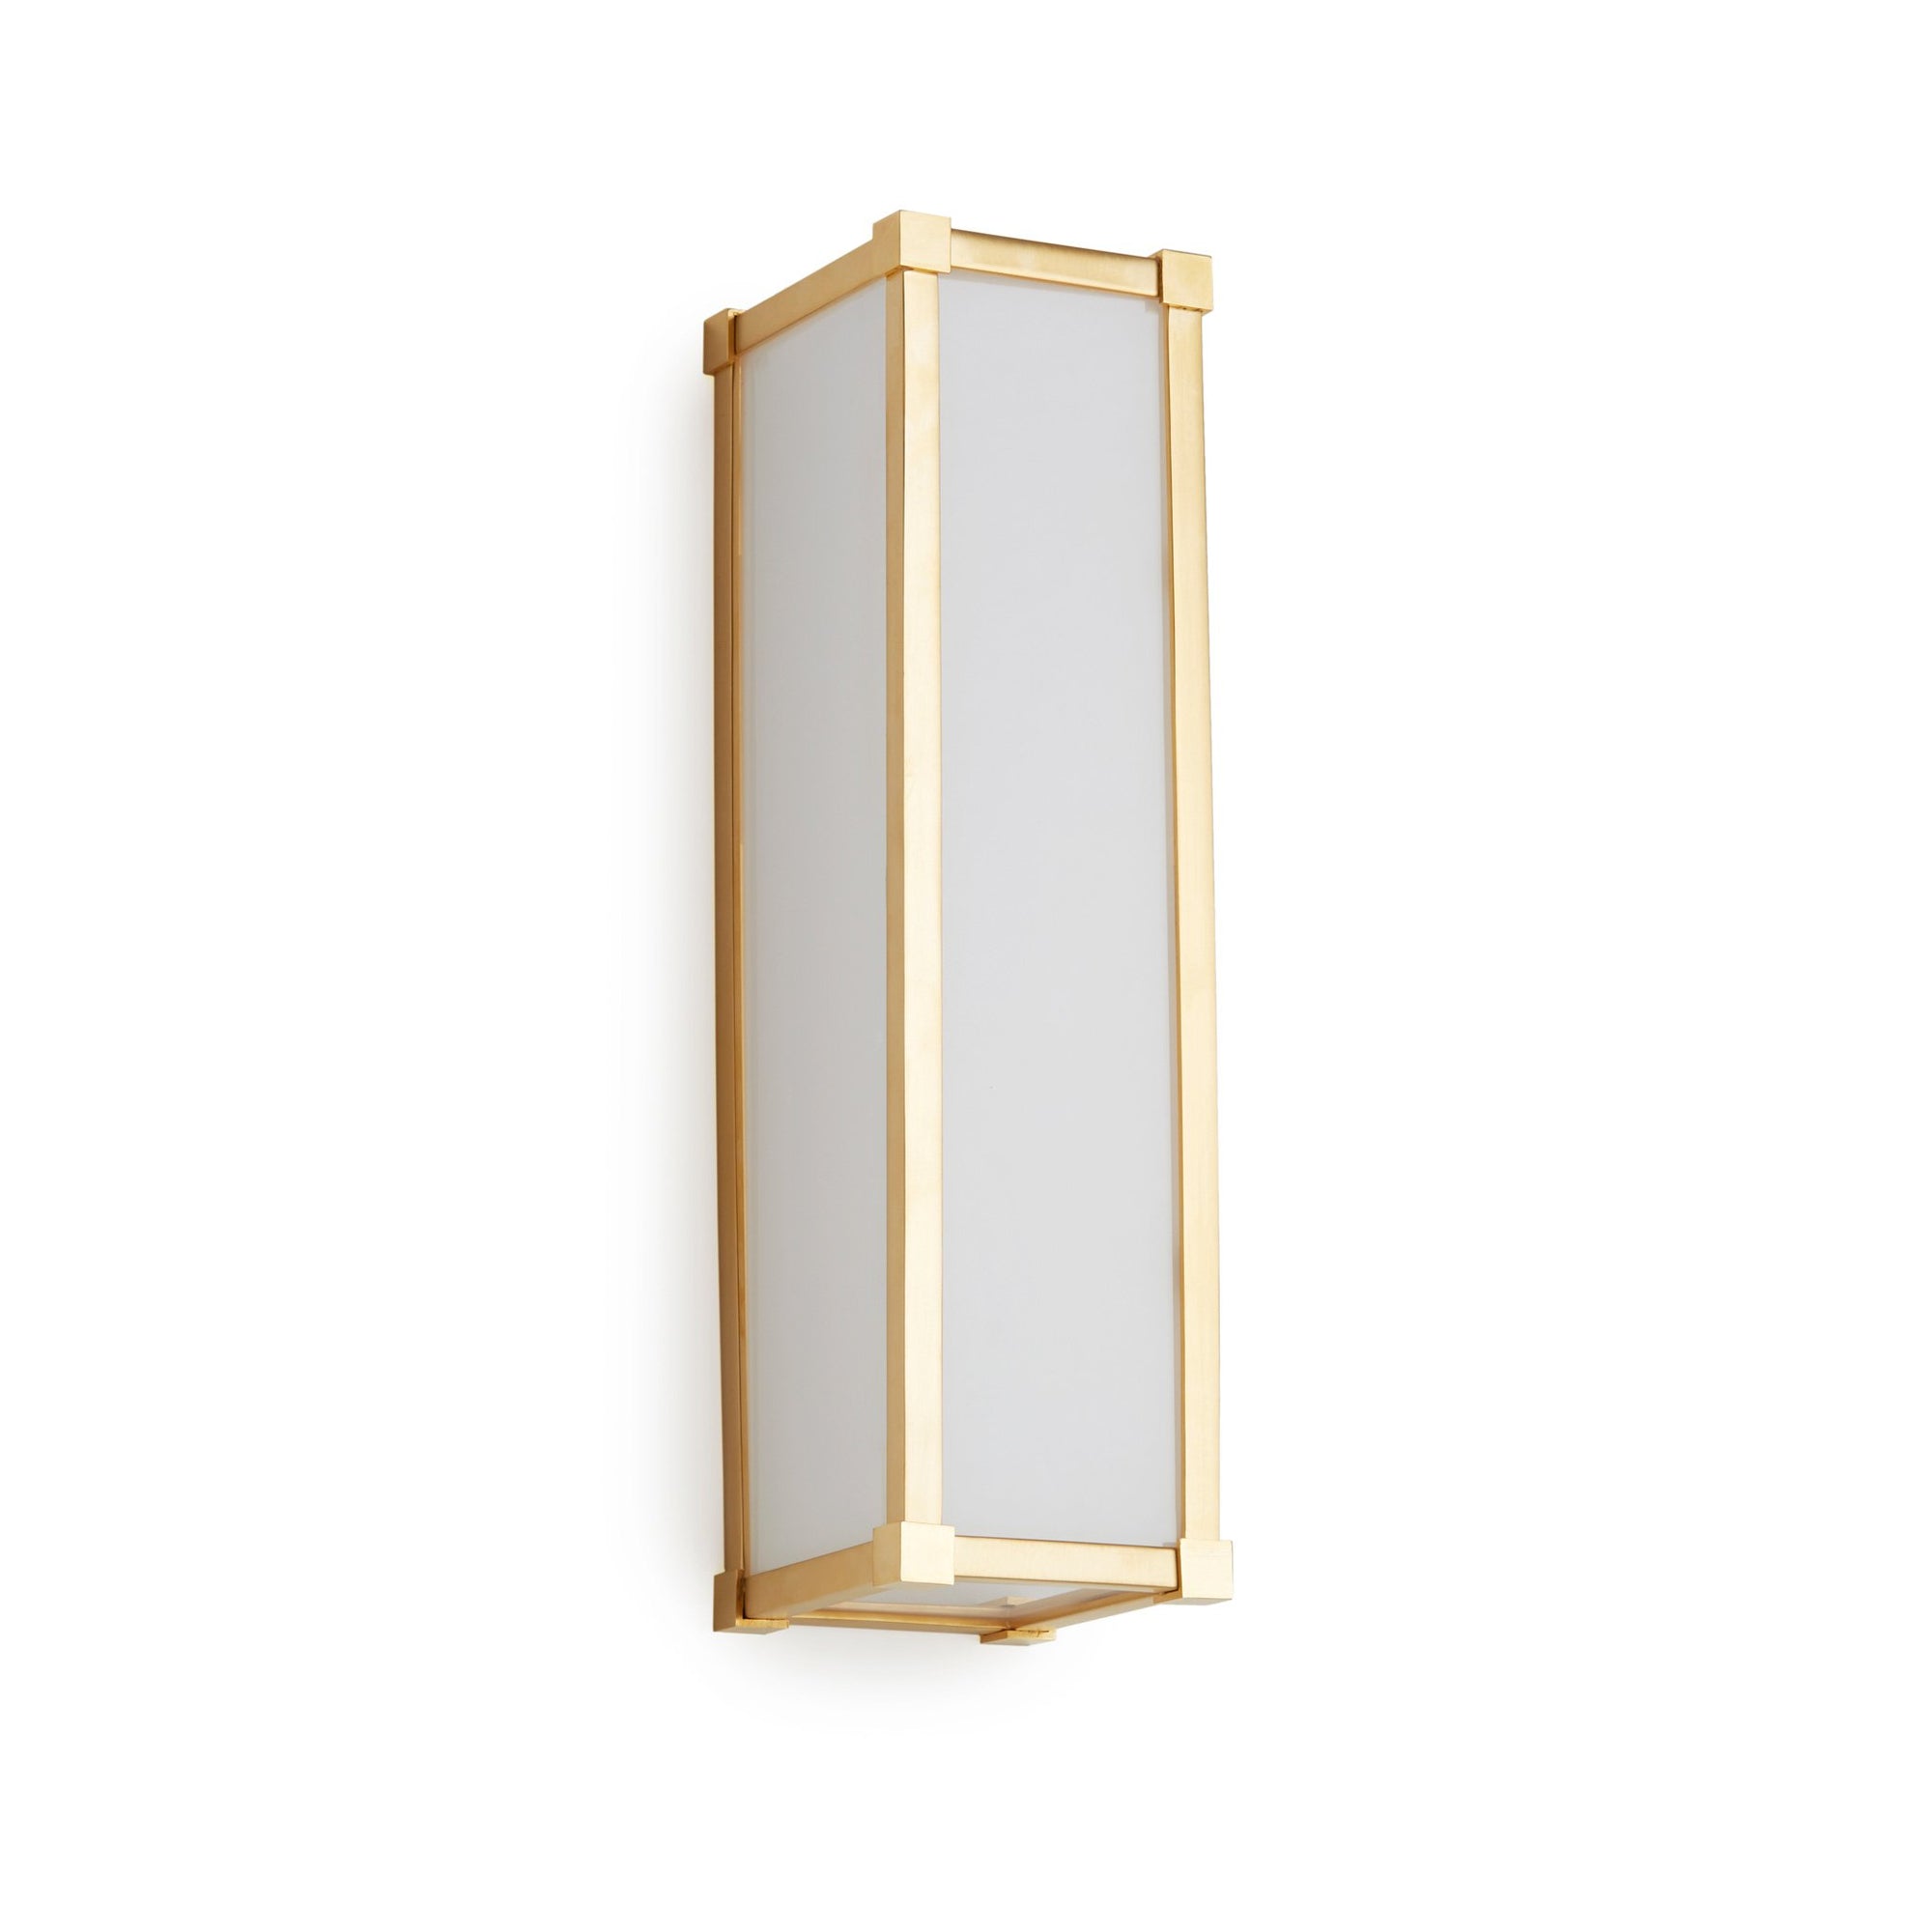 7114FG-16-VERT-GP Sherle Wagner International Square Knuckle Frosted Glass Panel Light in Gold Plate metal finish